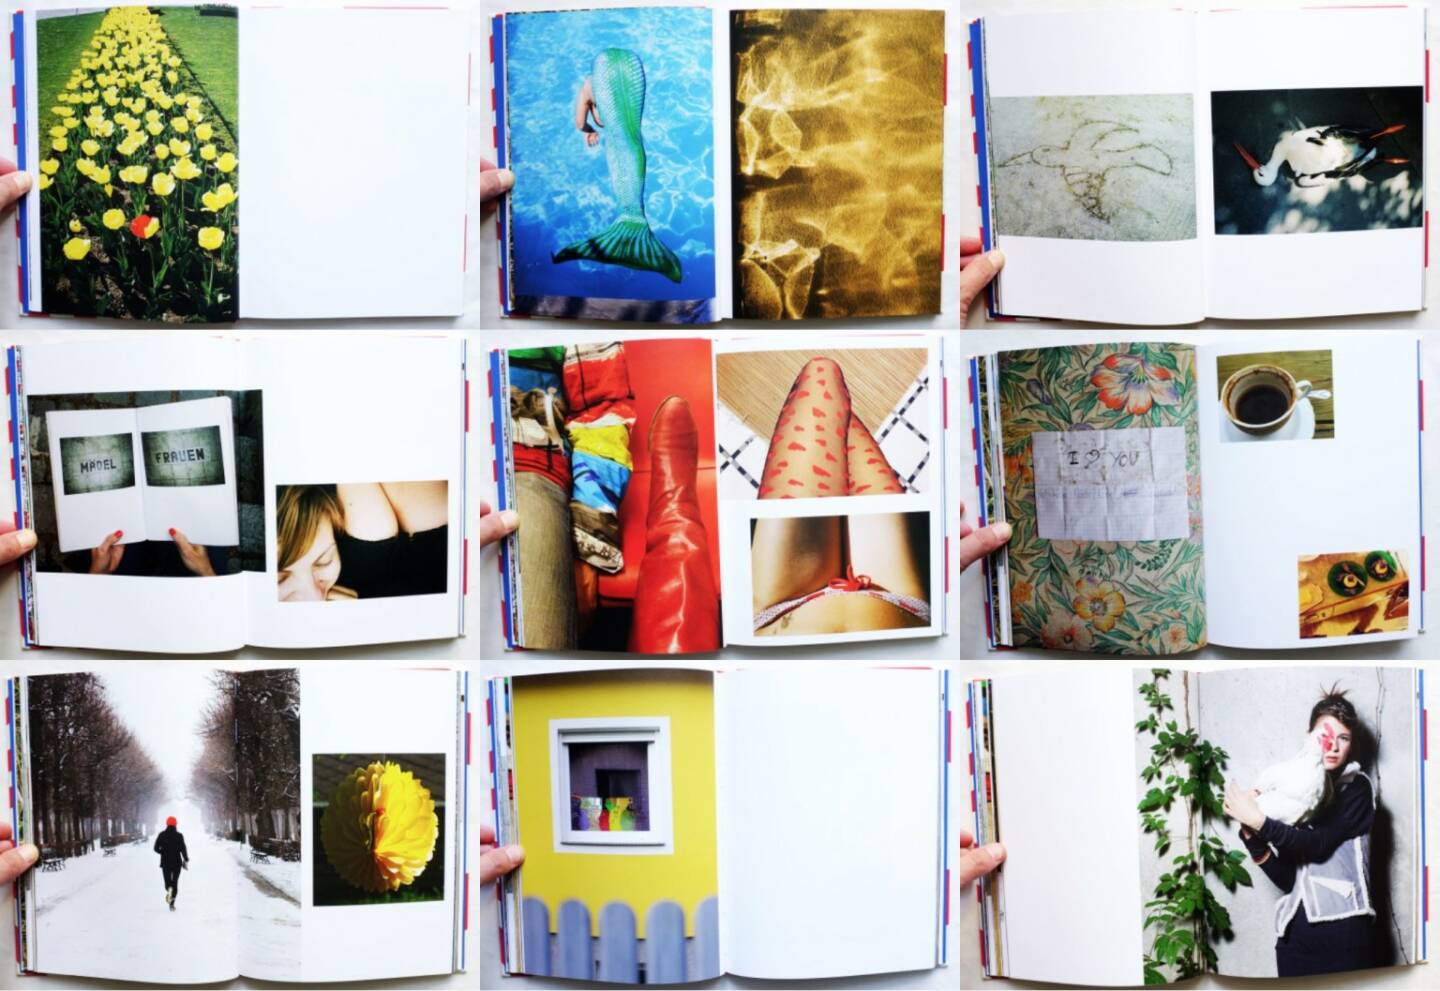 Petra Rautenstrauch - Peggy's Poetry Circus, Self published 2014, Beispielseiten, sample spreads - http://josefchladek.com/book/petra_rautenstrauch_-_peggys_poetry_circus